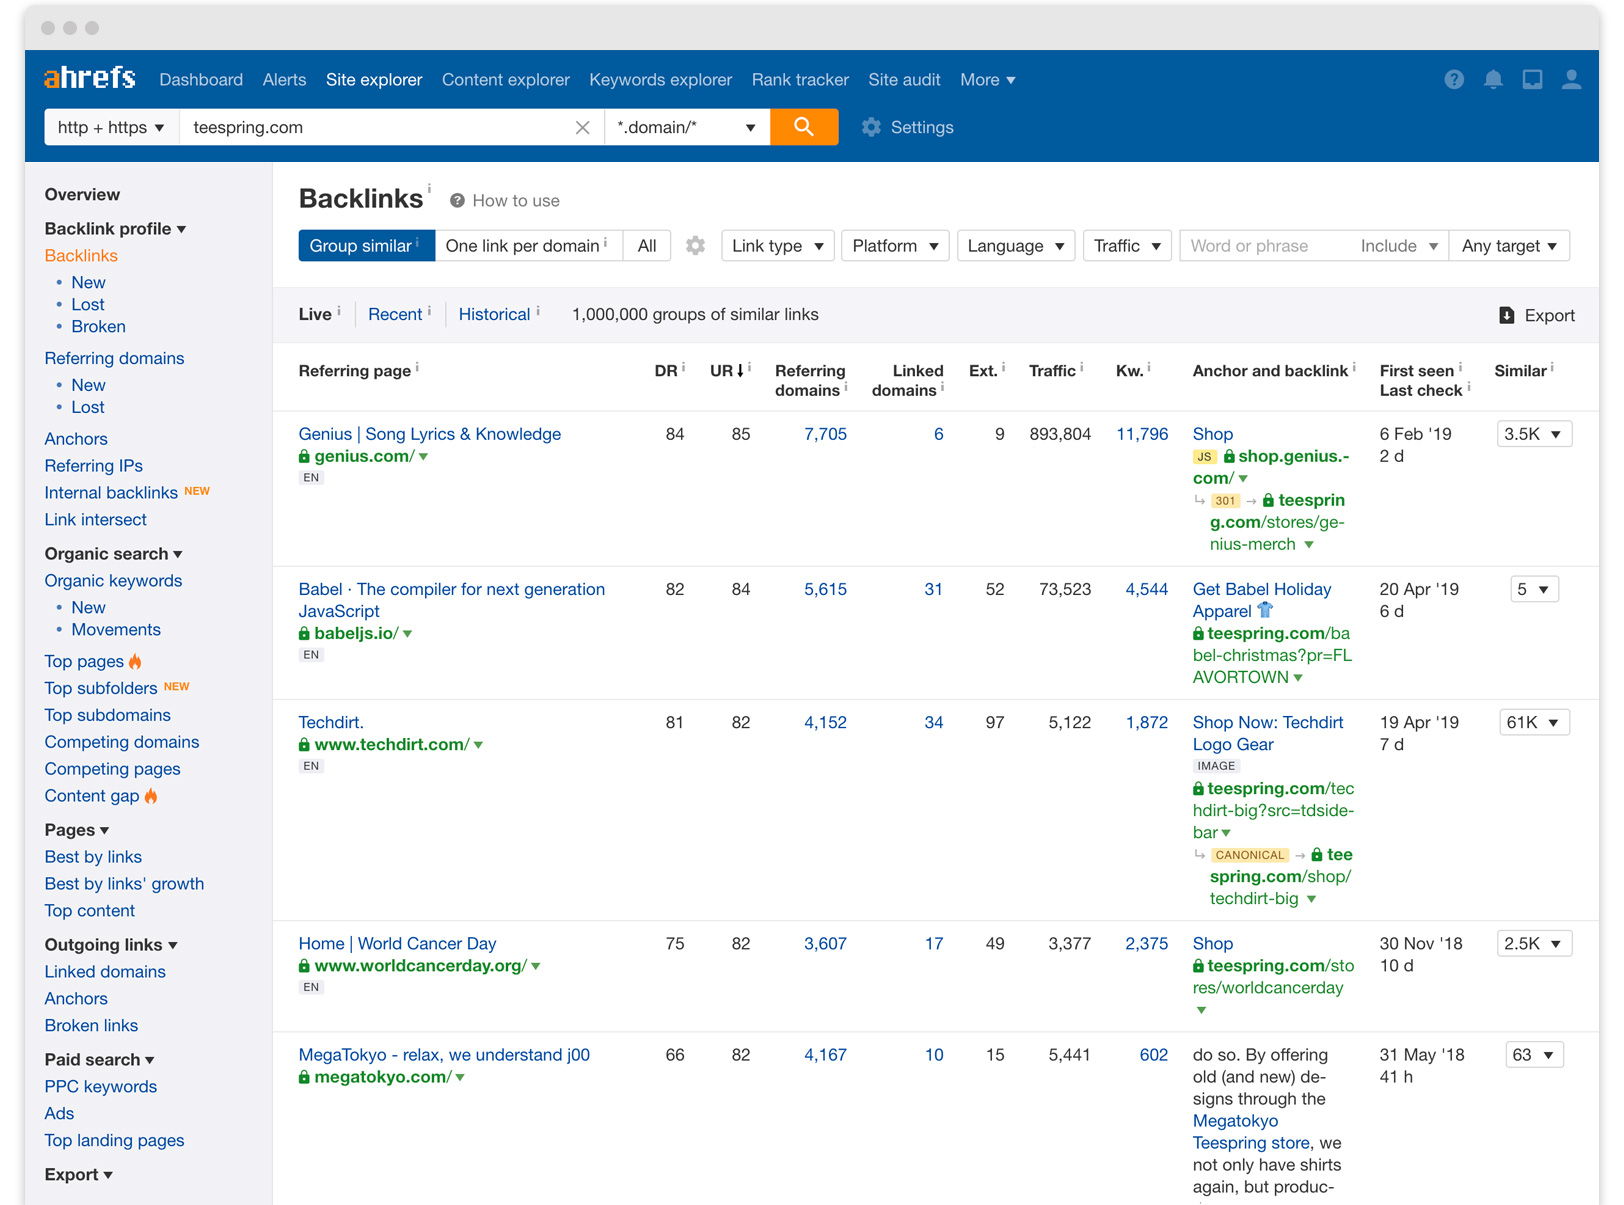 Ahrefs is a great tool for tracking site referrals as well as general SEO site value